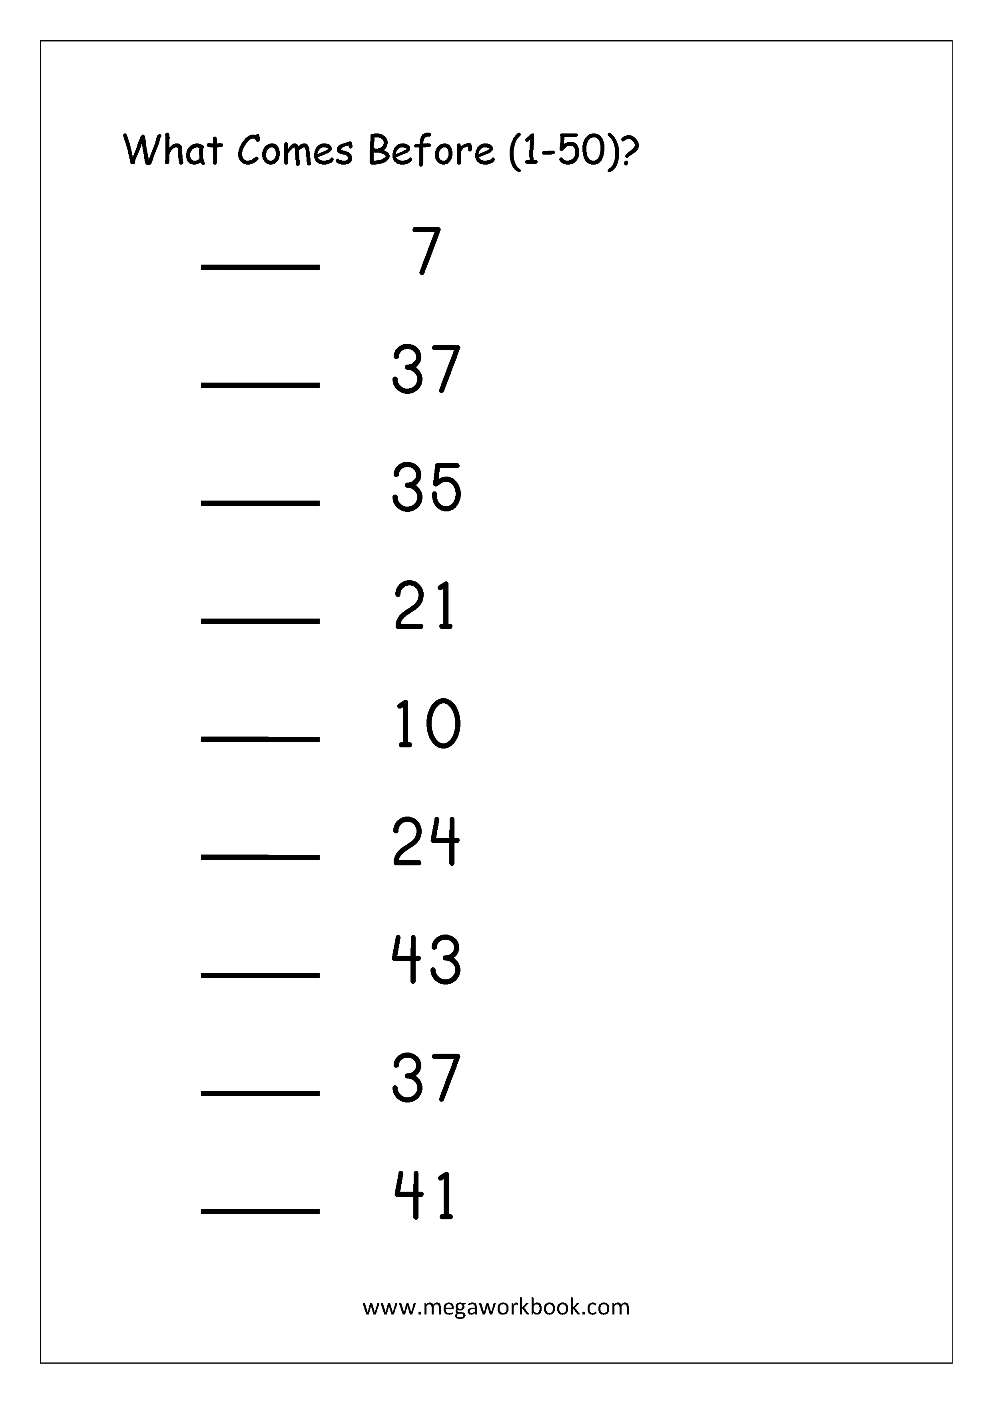 ordering-numbers-worksheets-missing-numbers-what-comes-before-and-after-number-1-10-1-20-1